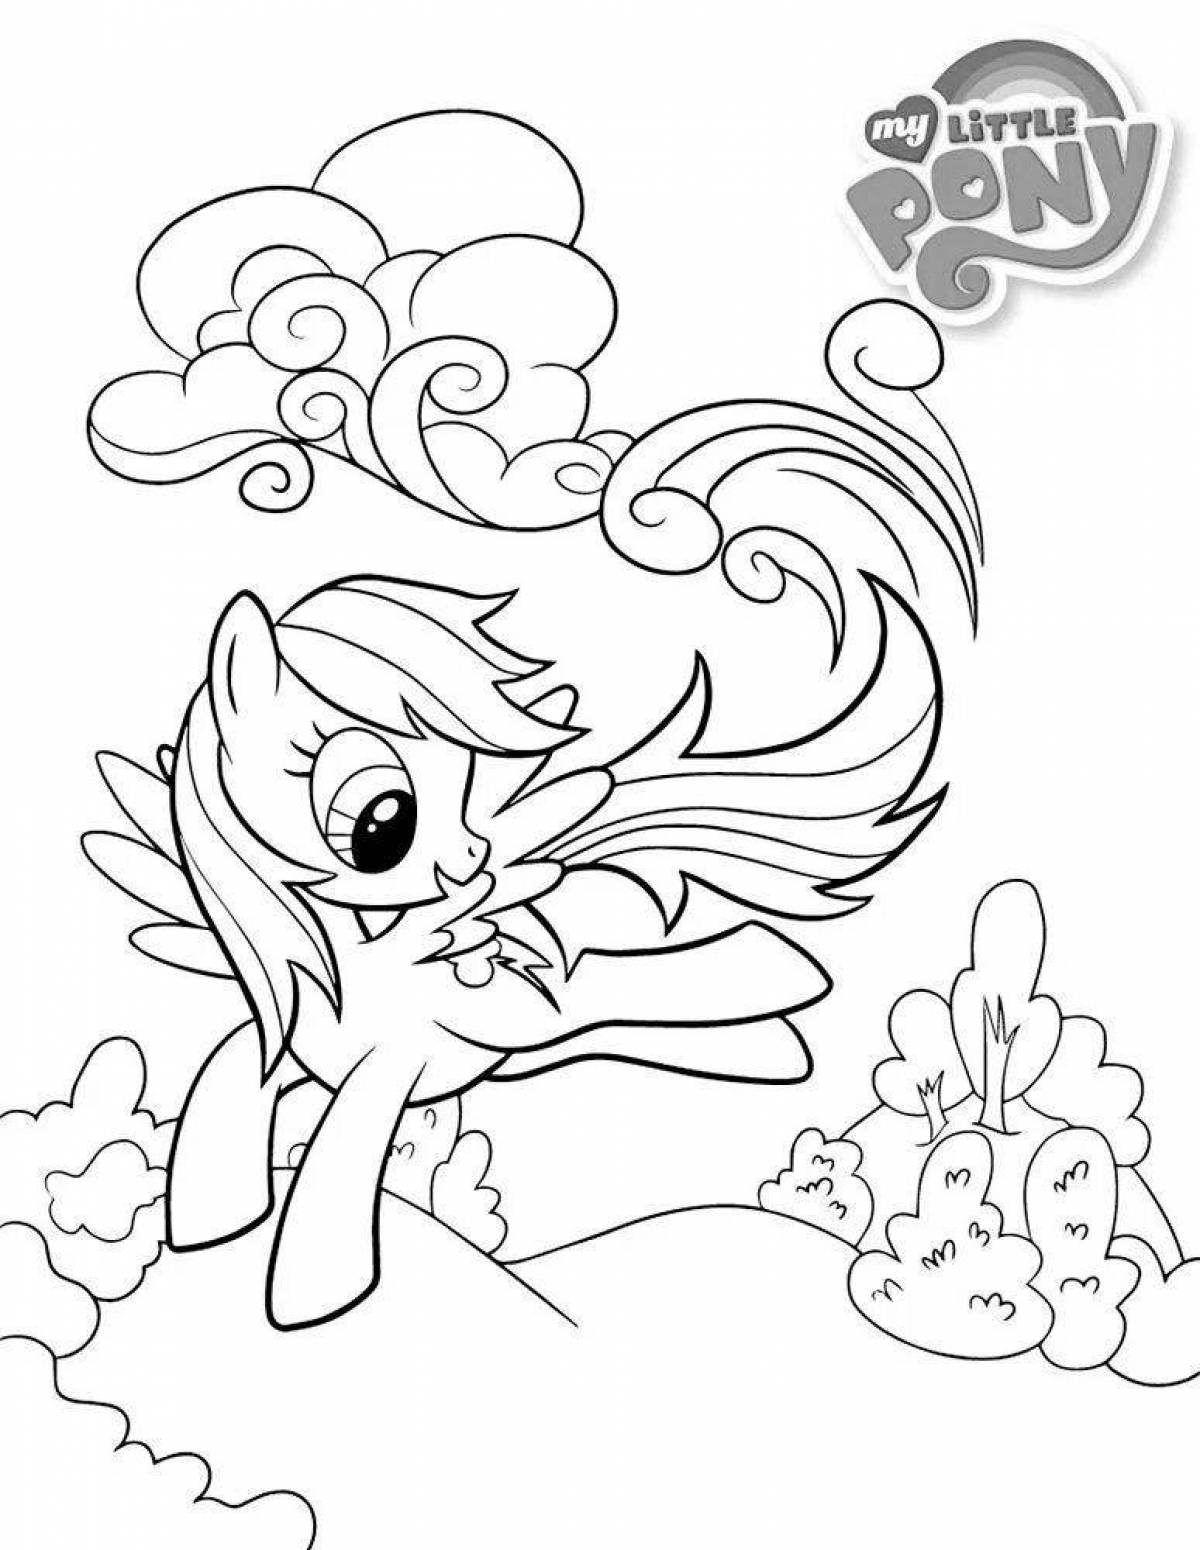 Blooming my little pony rainbow coloring page